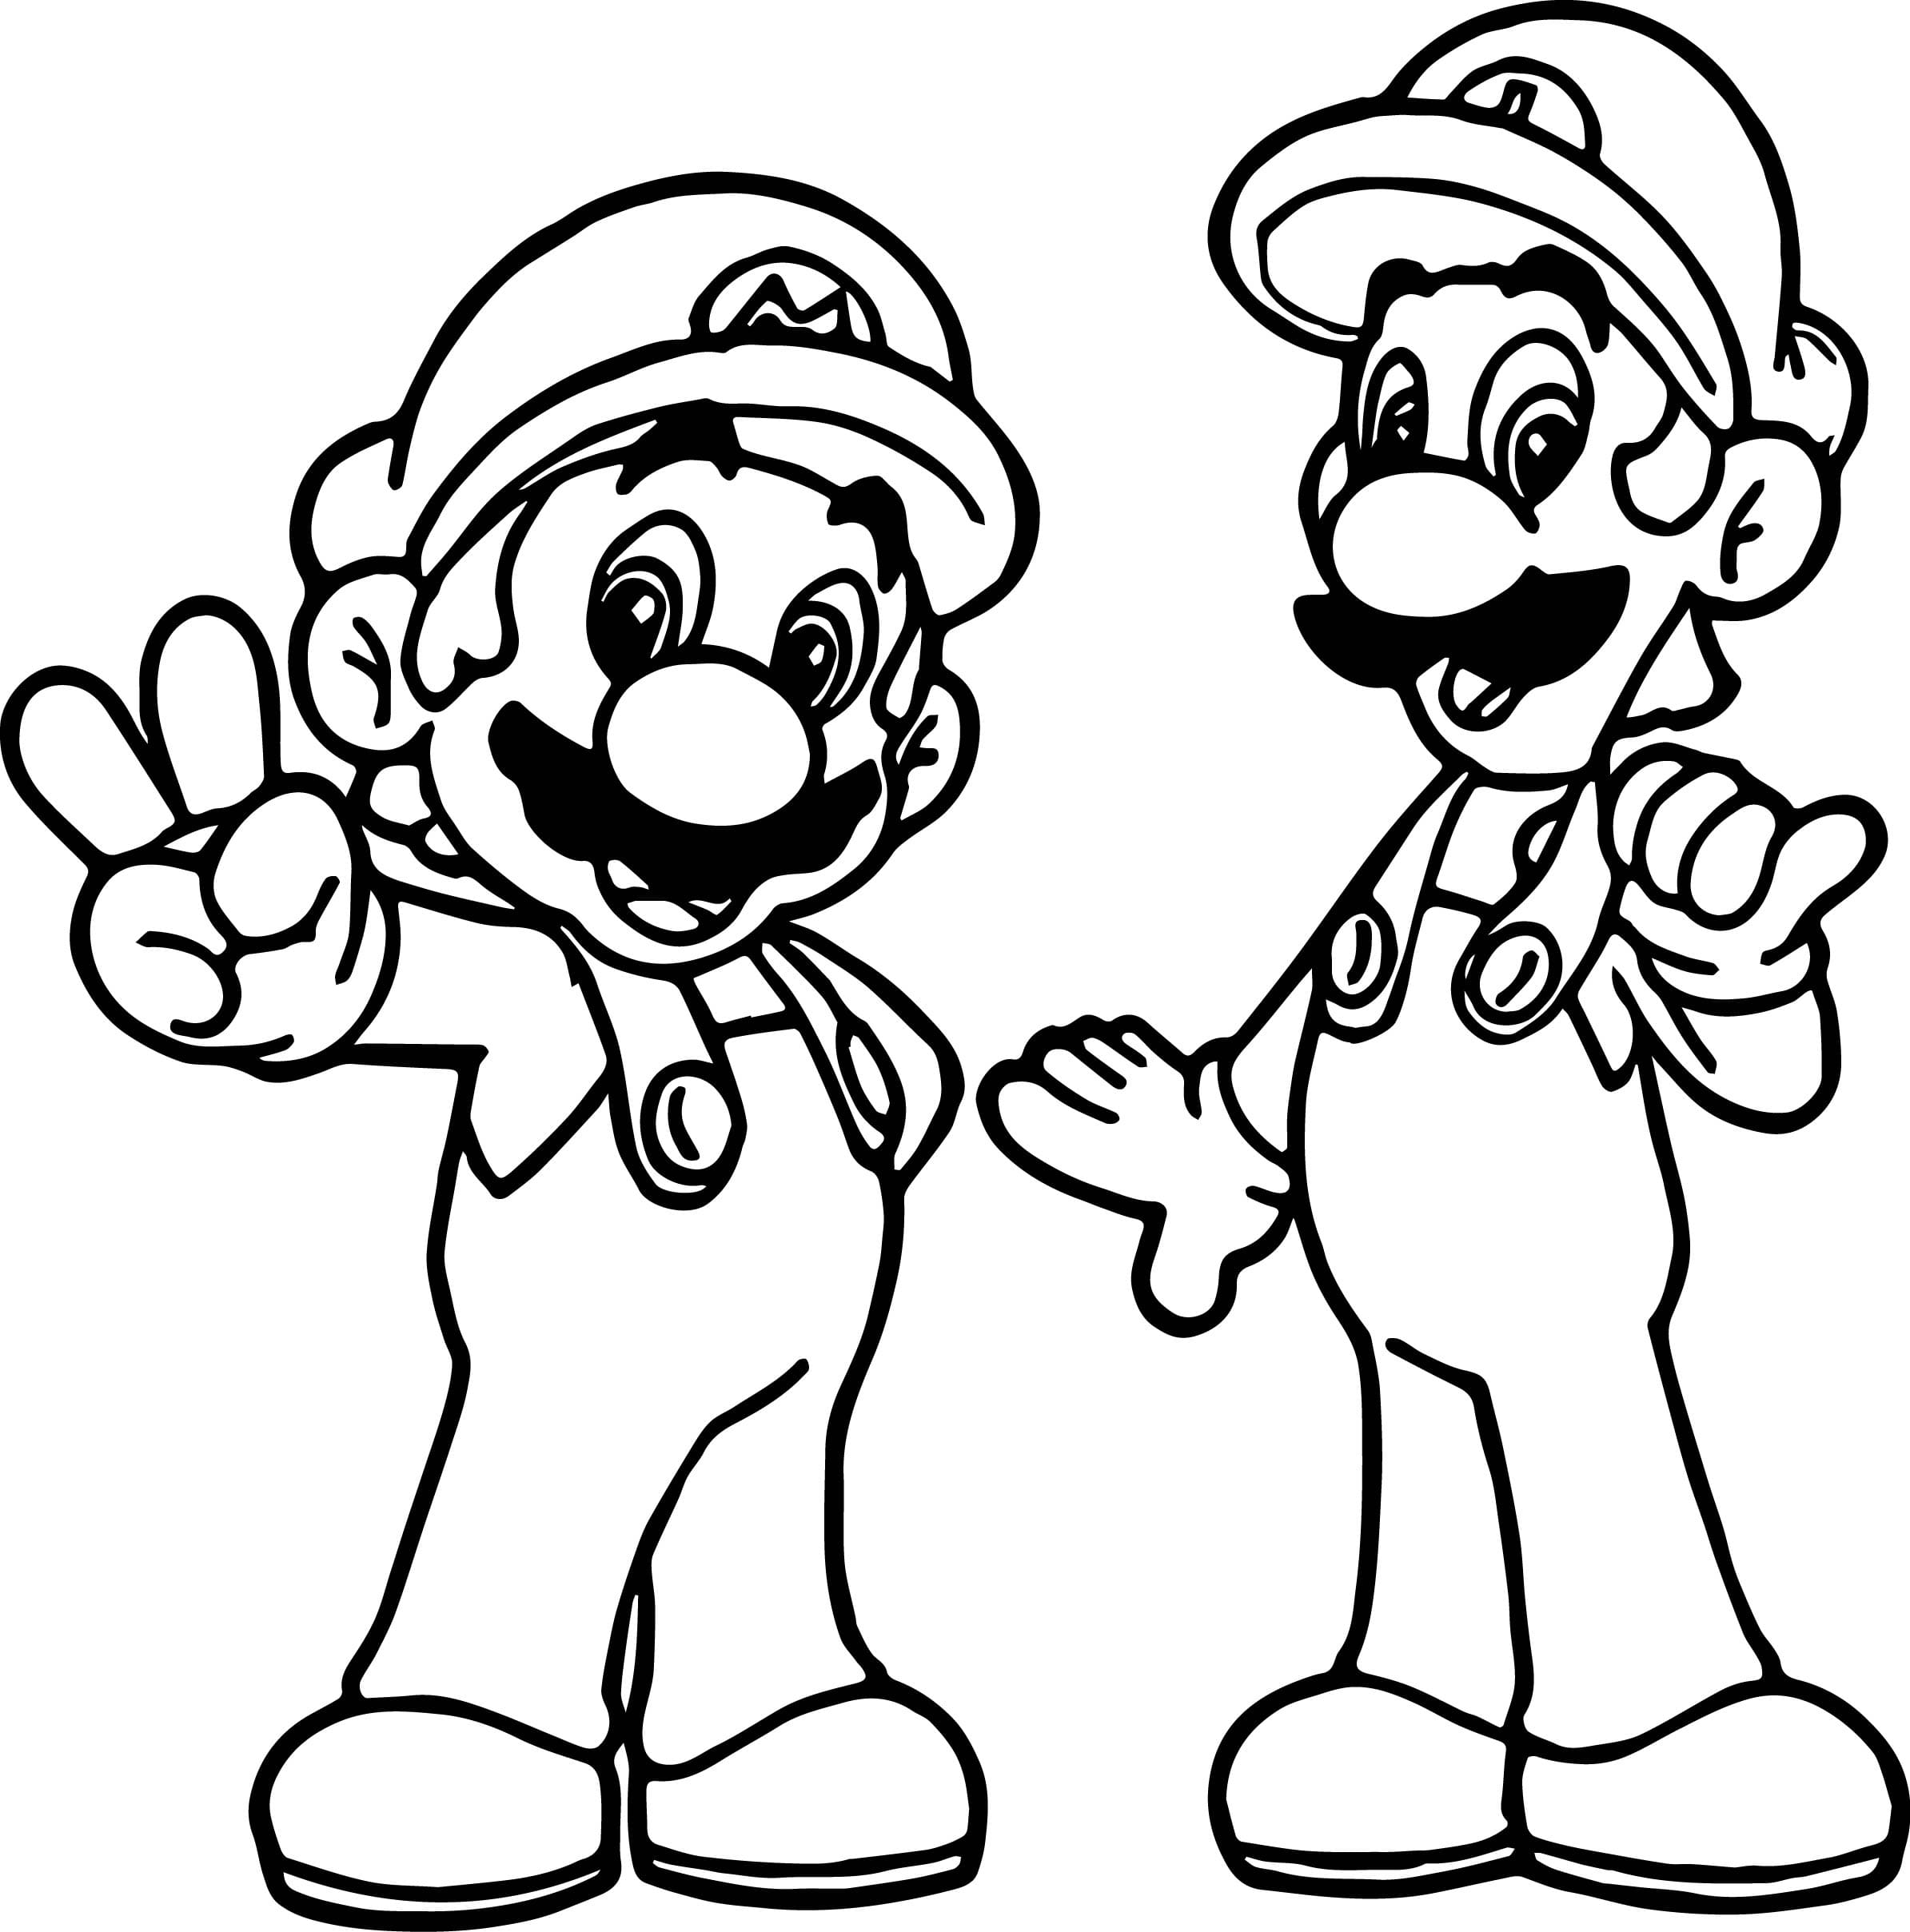 Mario Coloring Pages | 100 Best Pictures Free Printable